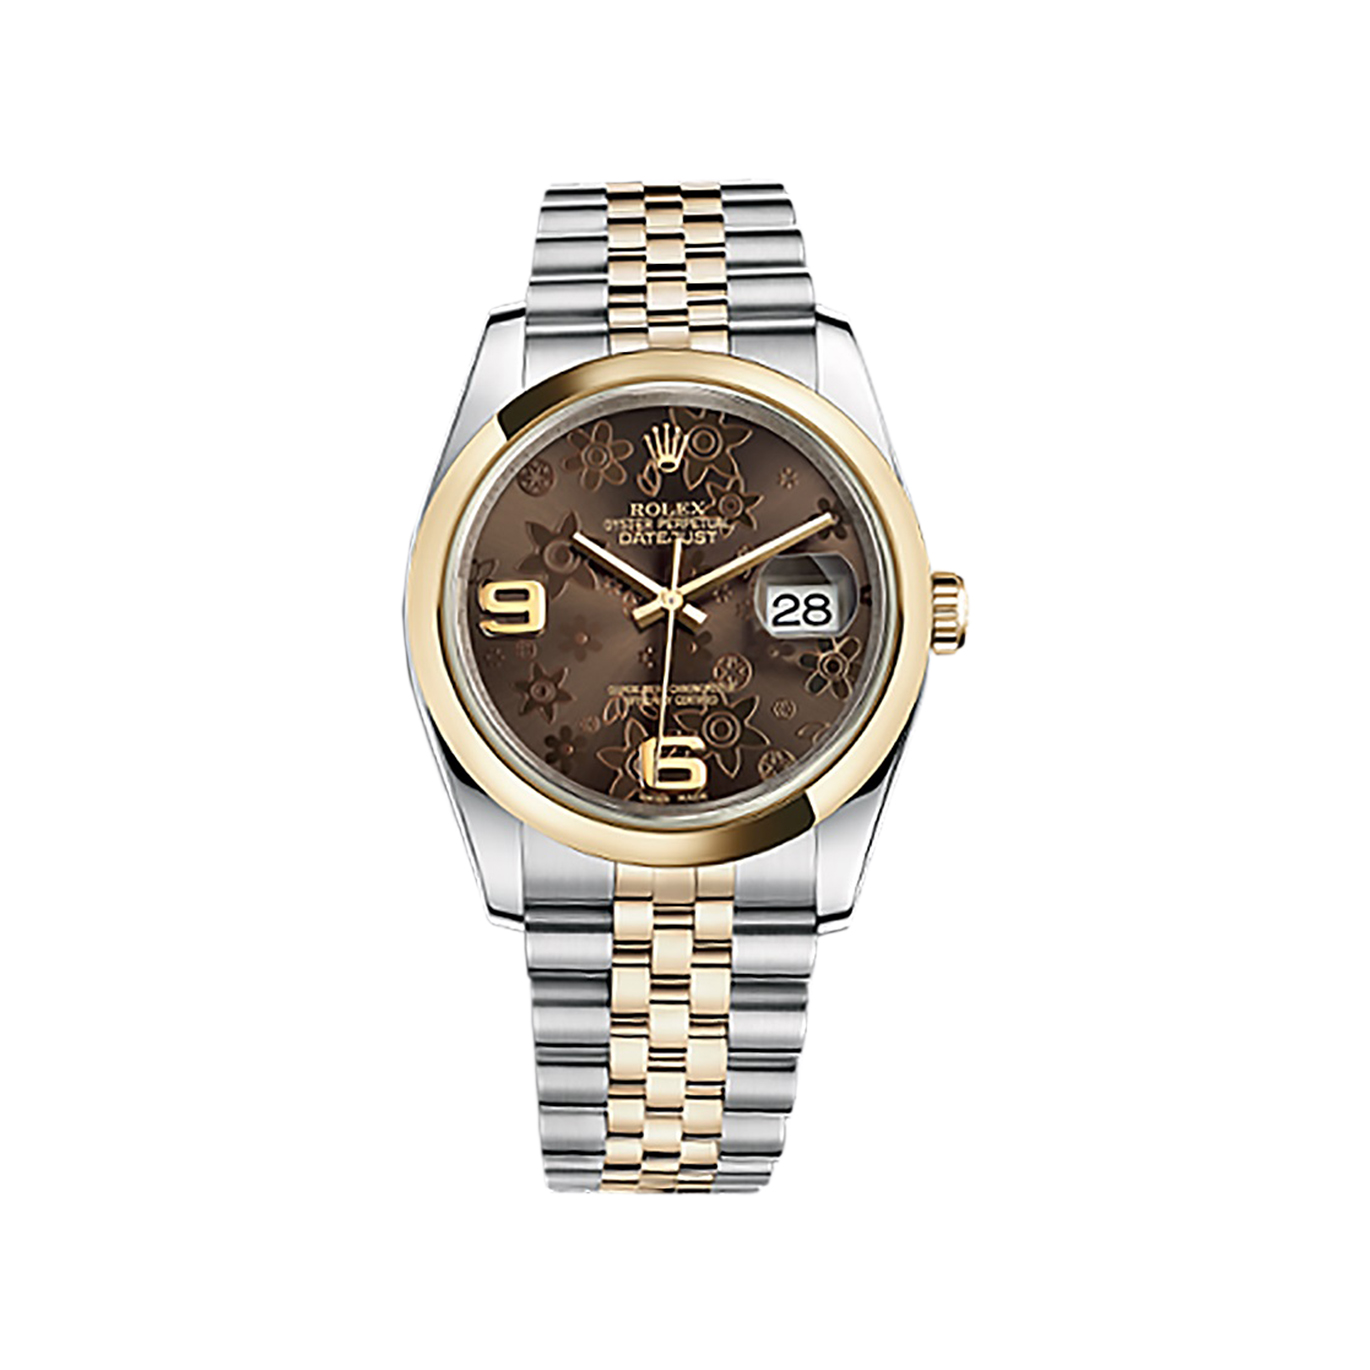 Datejust 36 116203 Gold & Stainless Steel Watch (Bronze Floral Motif)